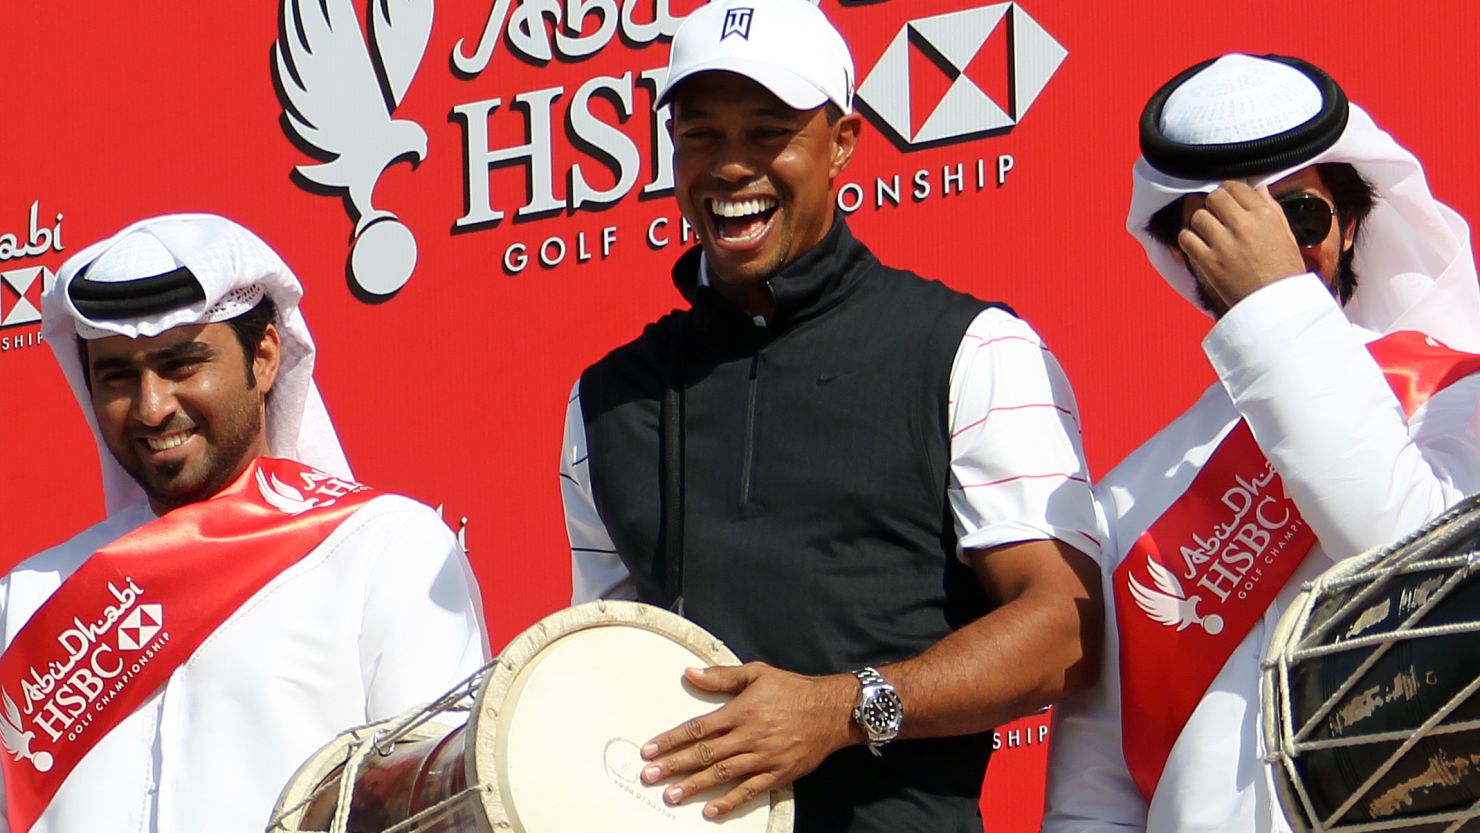 Tiger Woods was in jovial mood ahead of the Abu Dhabi Golf Championship which starts Thursday.